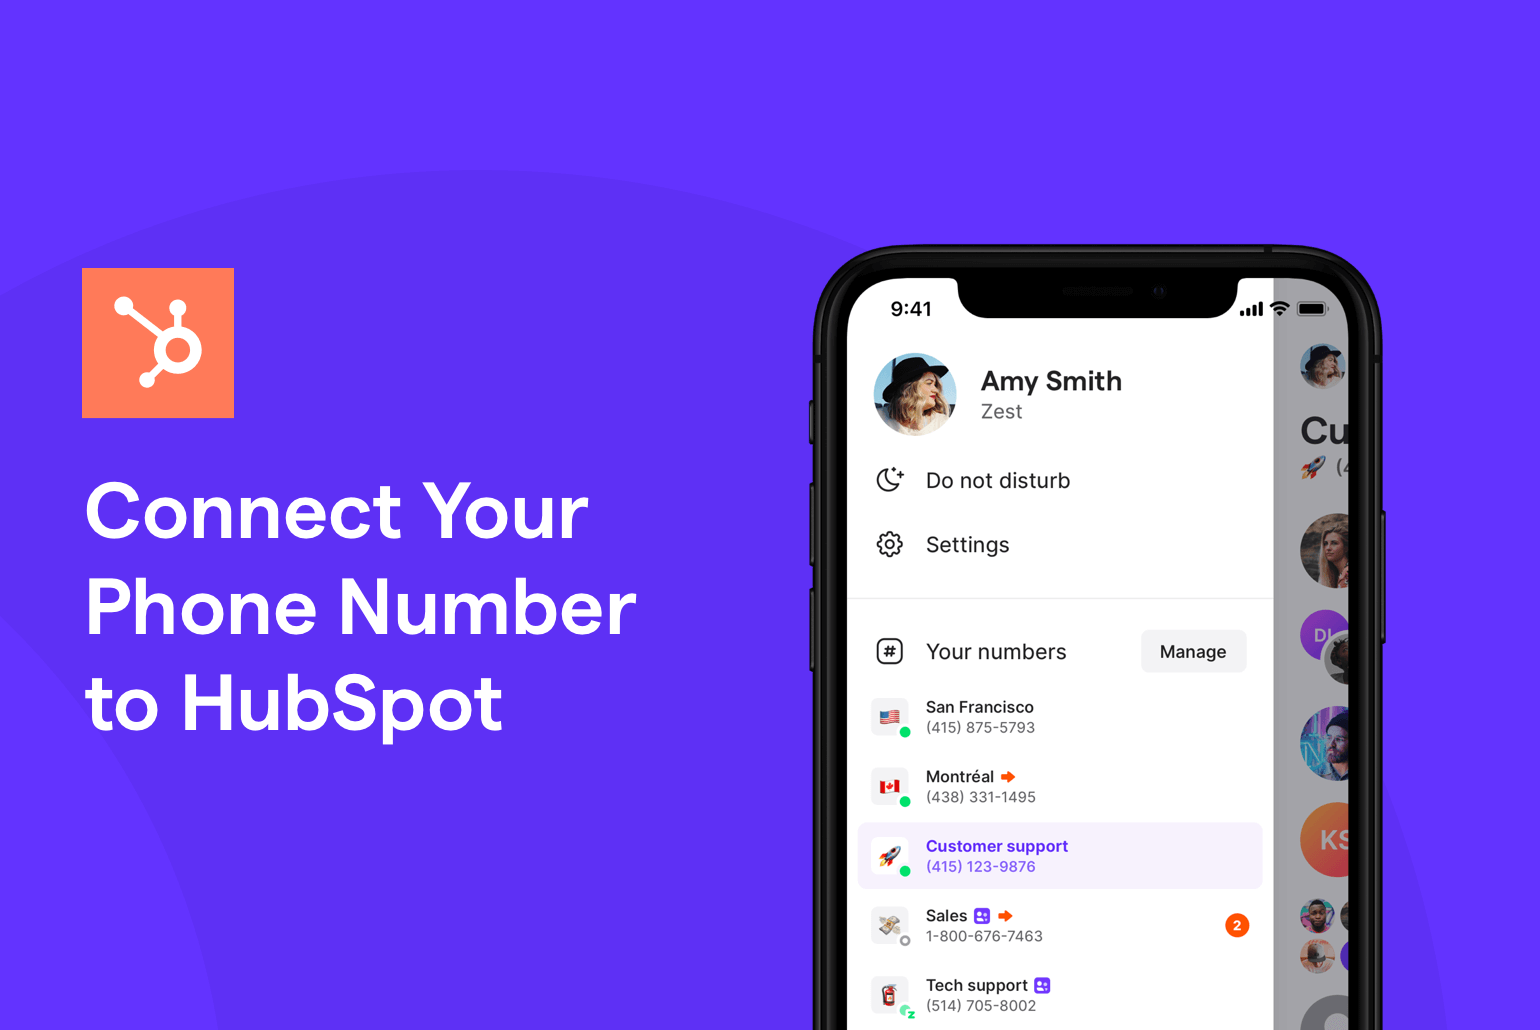 connect your phone number to HubSpot